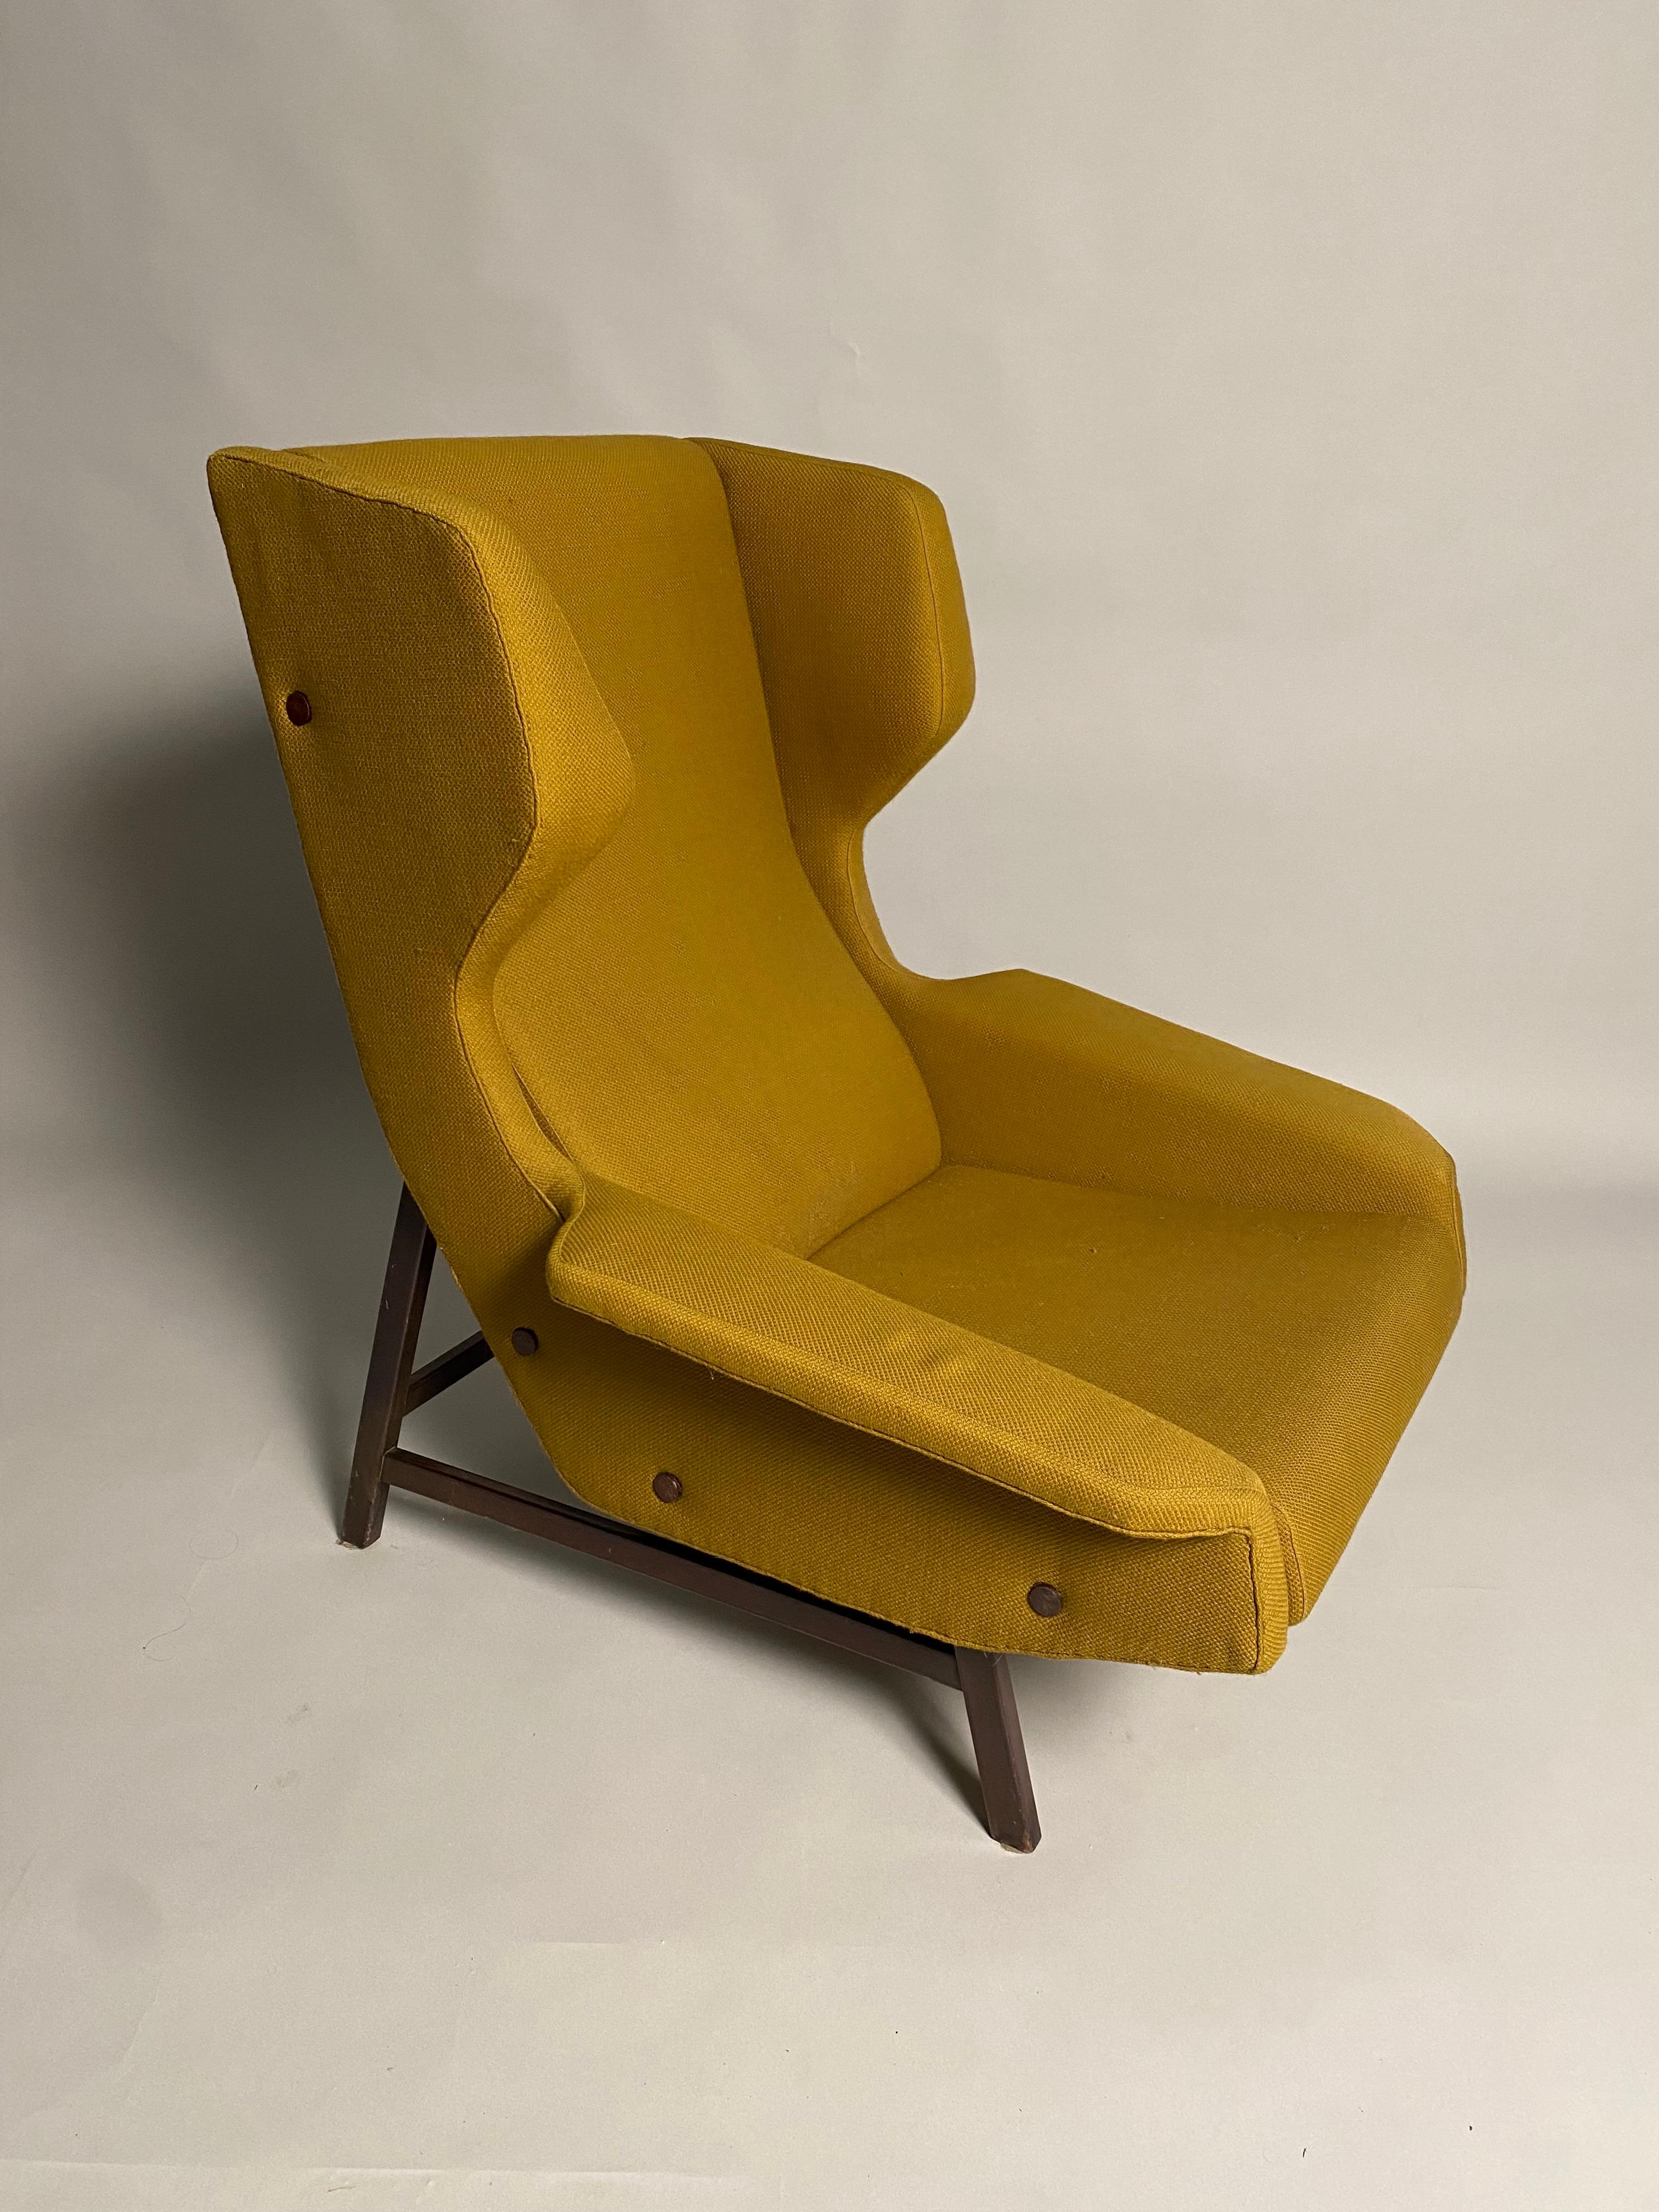 Fabric Gianfranco Frattini, Rare Pair of Wingback Armchairs Model 877, Cassina 1959 For Sale